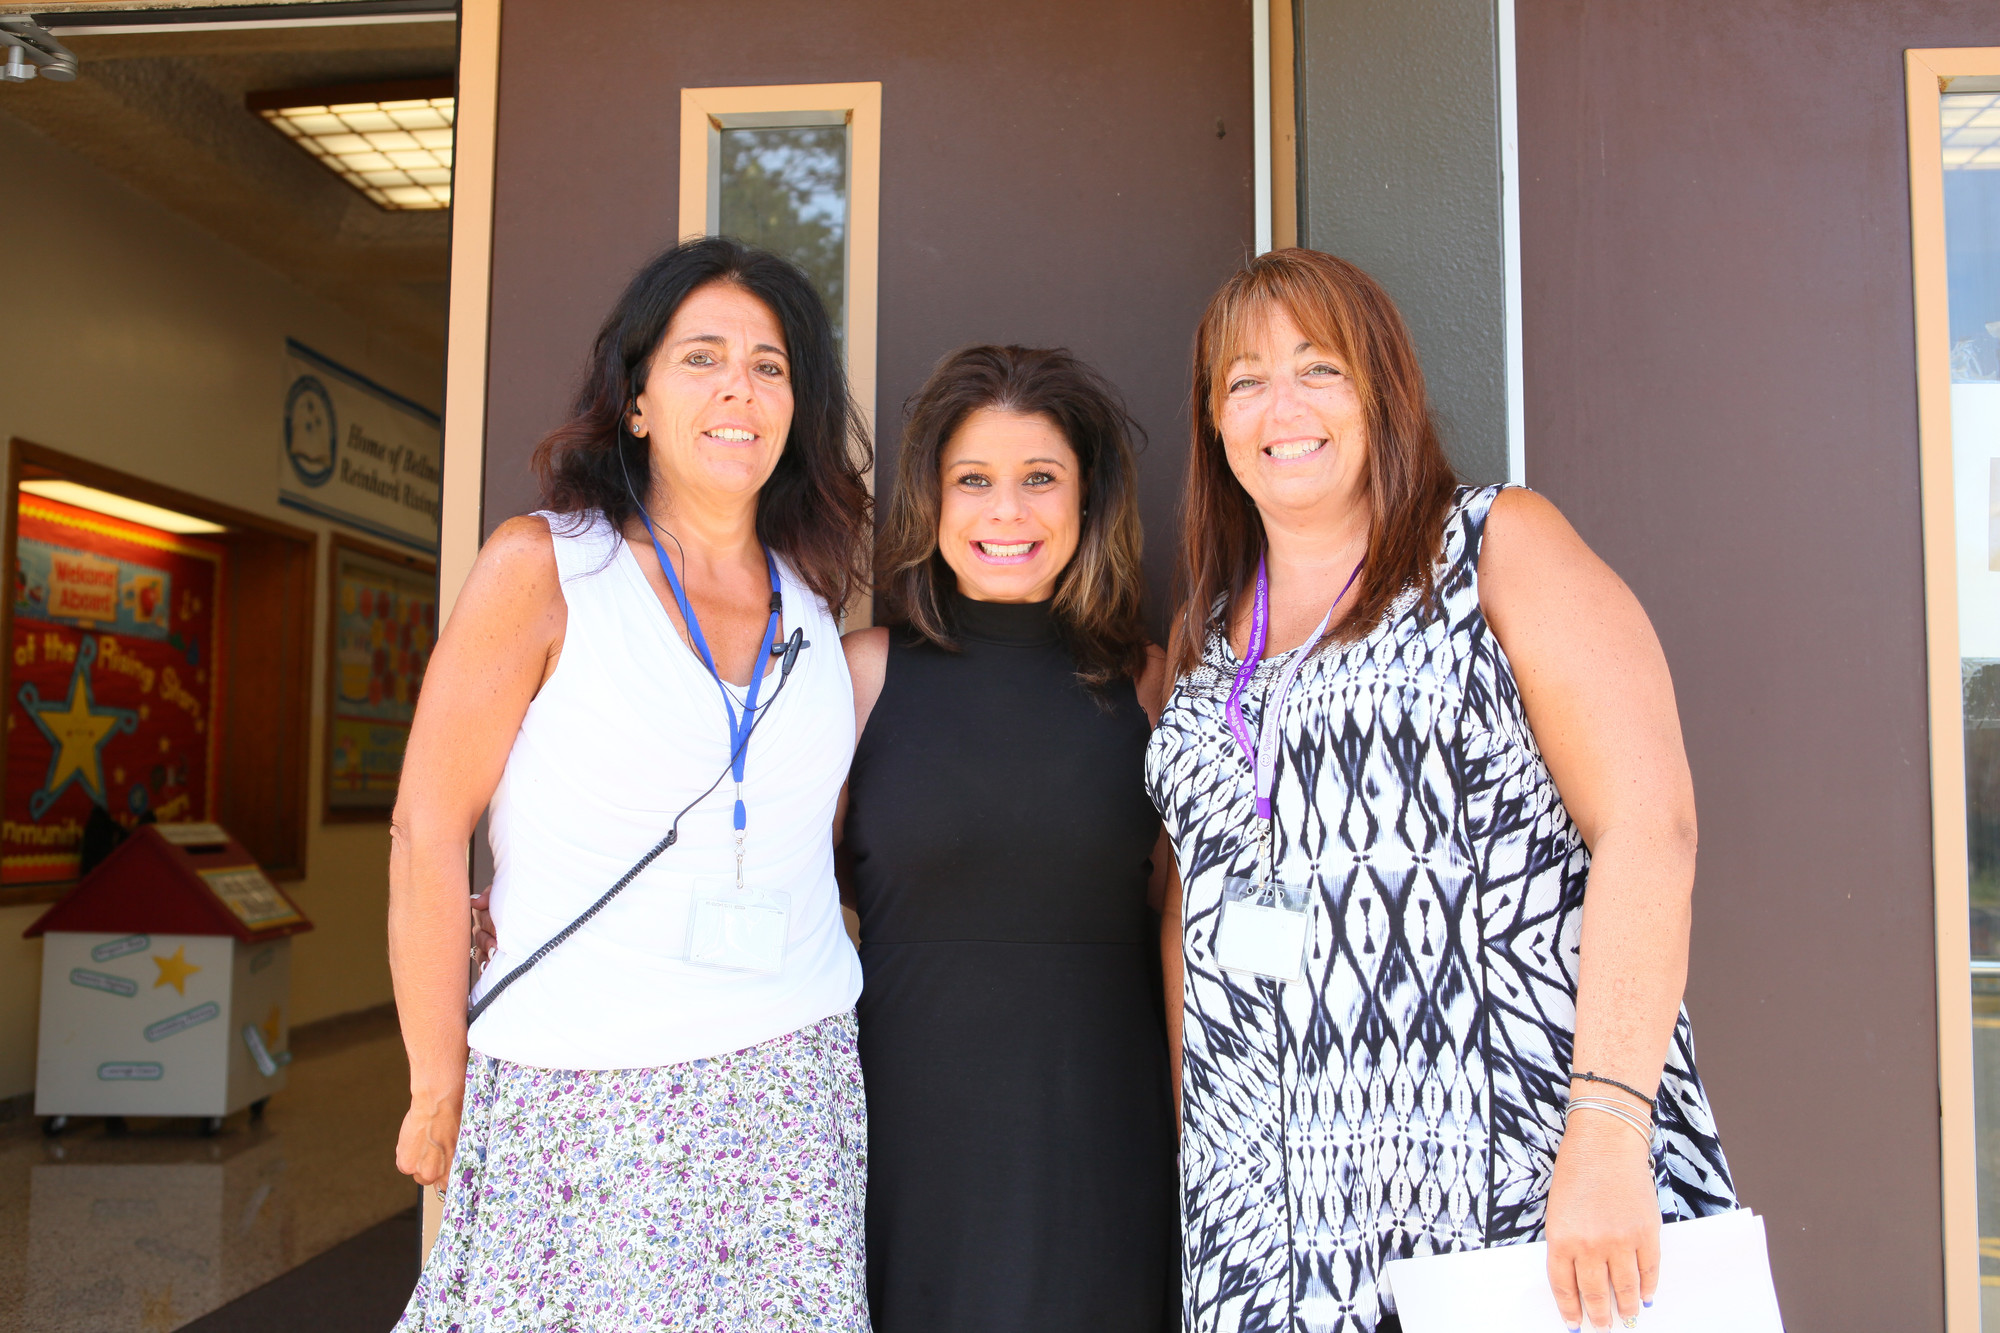 Staff members Lisa Esposito, Julie Hill and Gina Partland awaited the arrival of children on the first day of school.